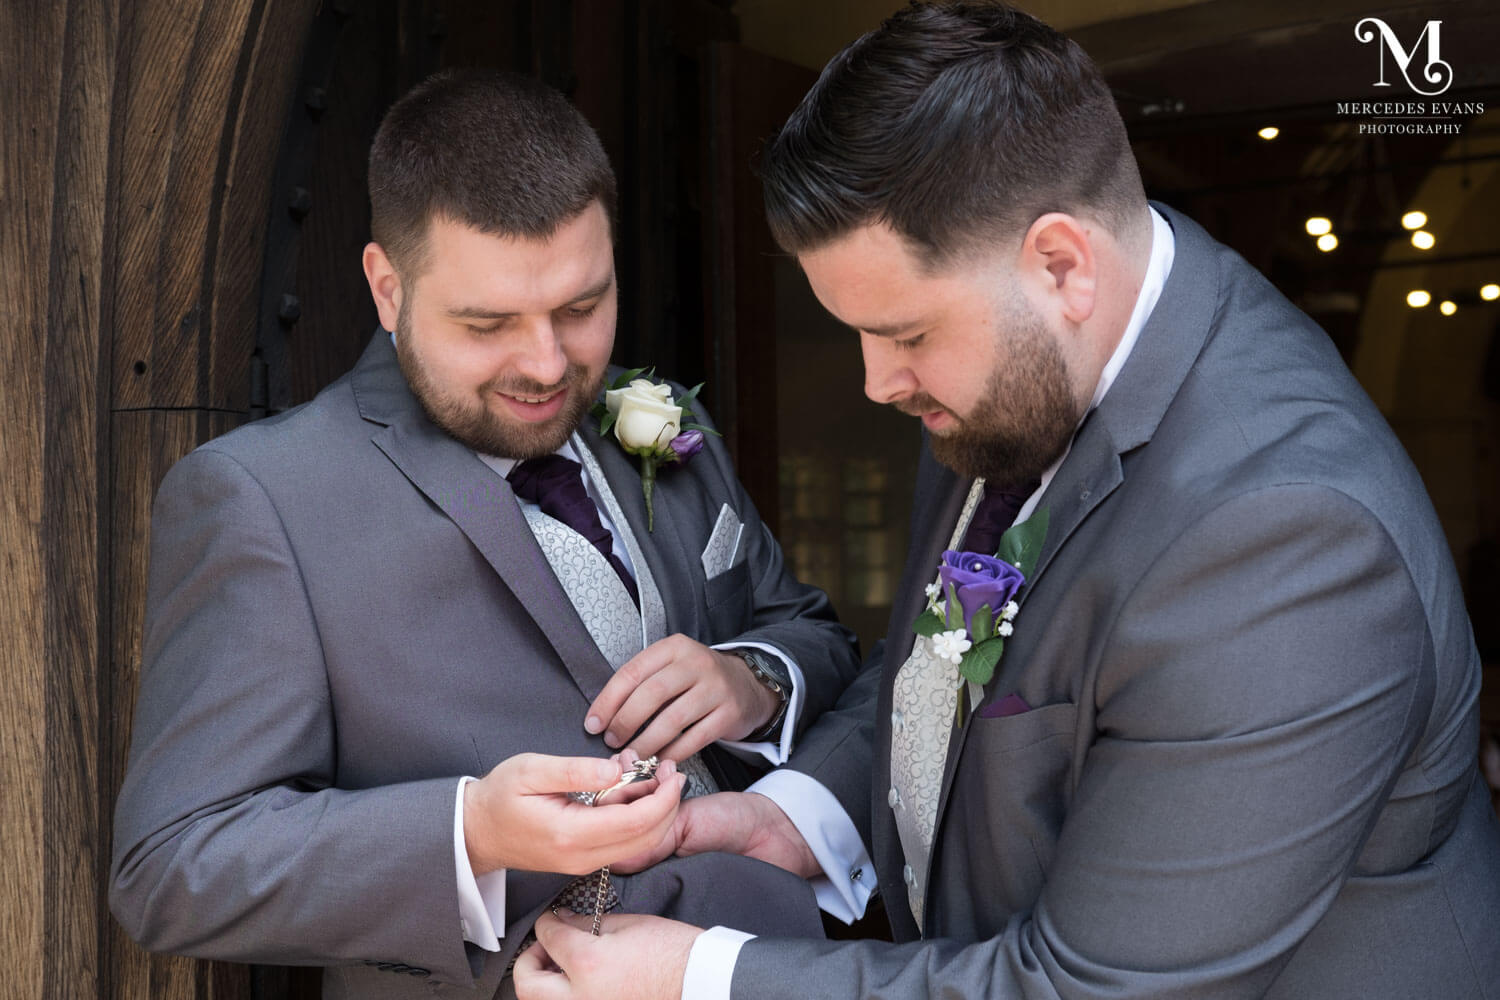 The best man helps the groom with his pocket watch